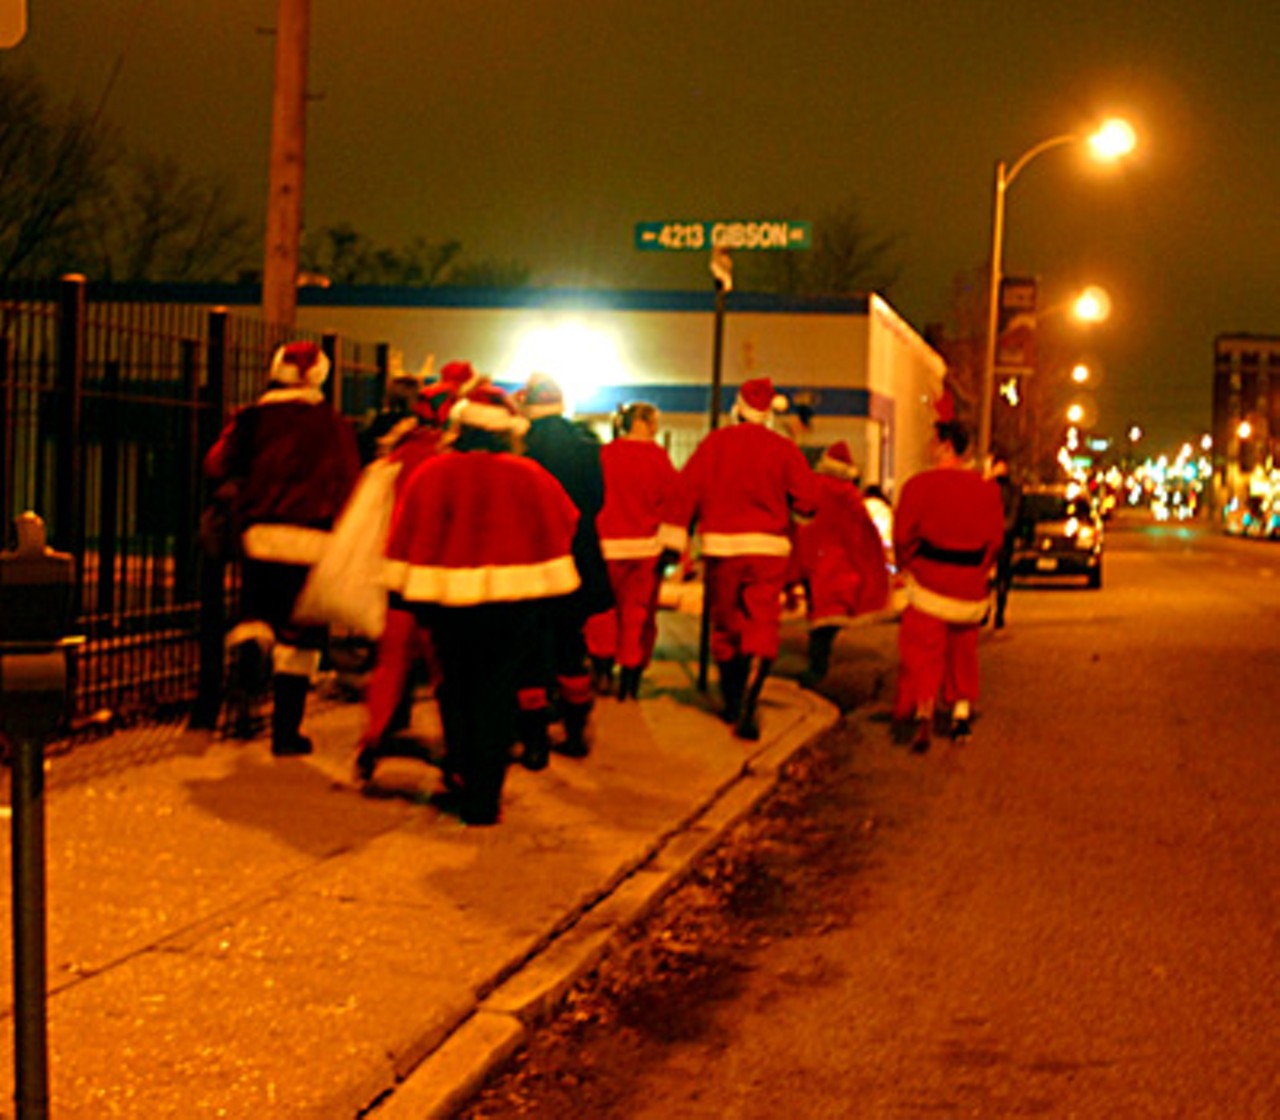 Despite the cold, all different Santas rode buses, Metro Link and walked to 20 destinations.